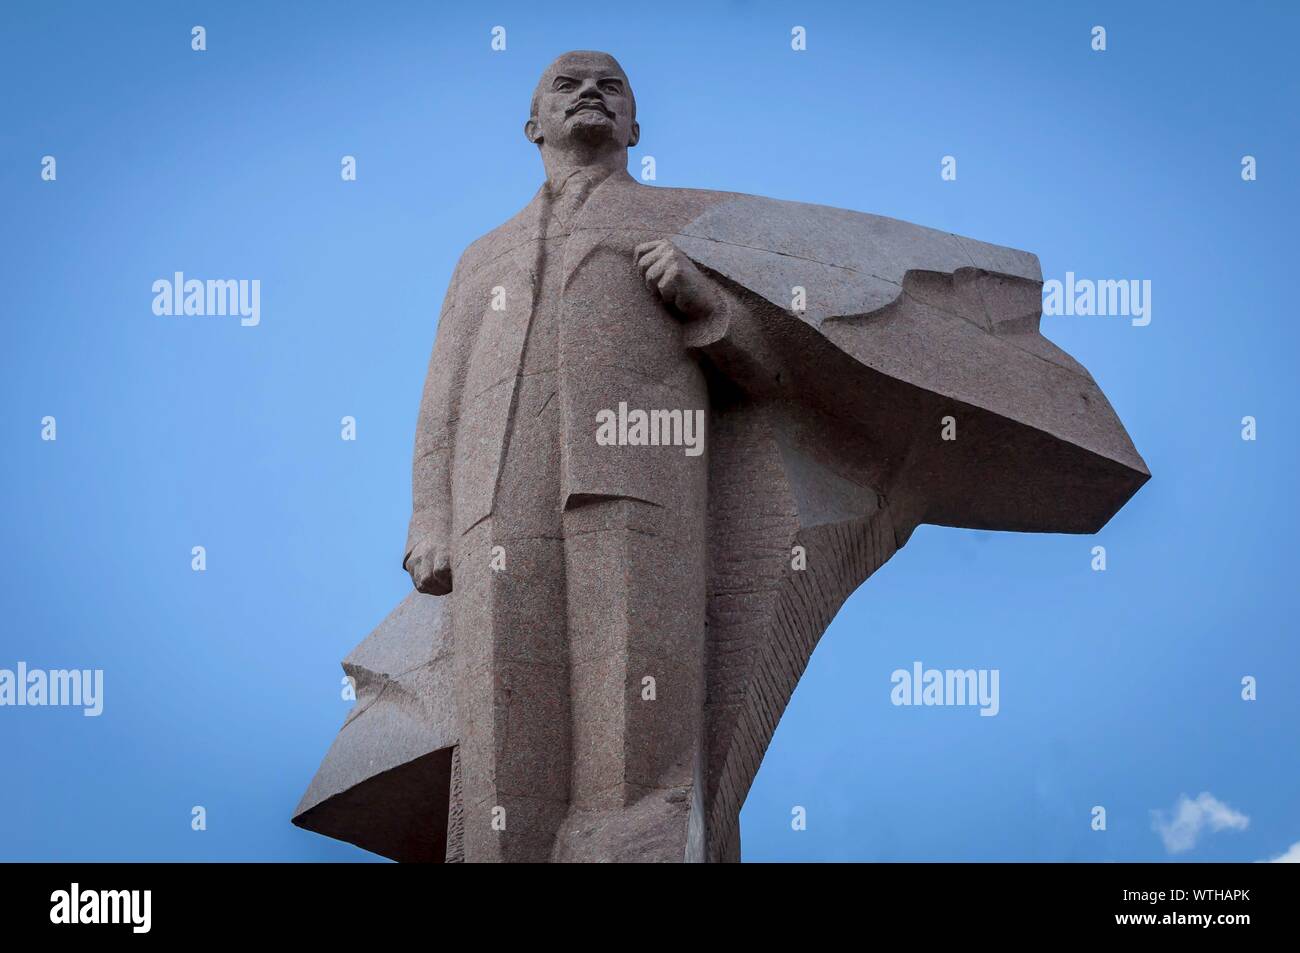 TIRASPOL, TRANSNISTRIA, MOLDOVA. August 24, 2019. Vladimir Lenin statue in front of the Supreme Council of Pridnestrovie. This monument remained Stock Photo